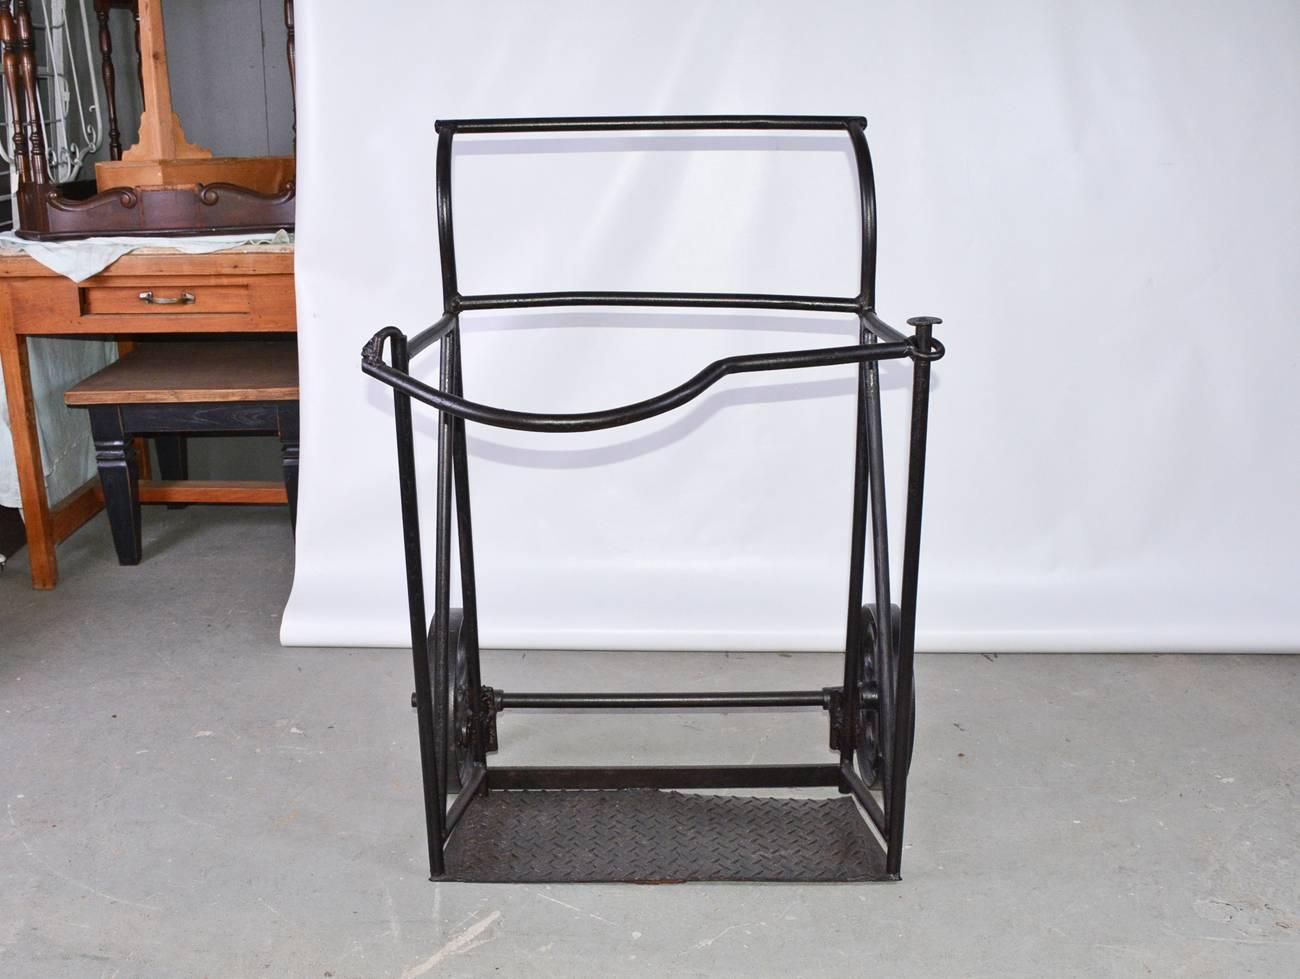 Vintage industrial black iron two-wheeled cart or hand truck, circa 1900. Top front bar unhooks at left side and swivels.